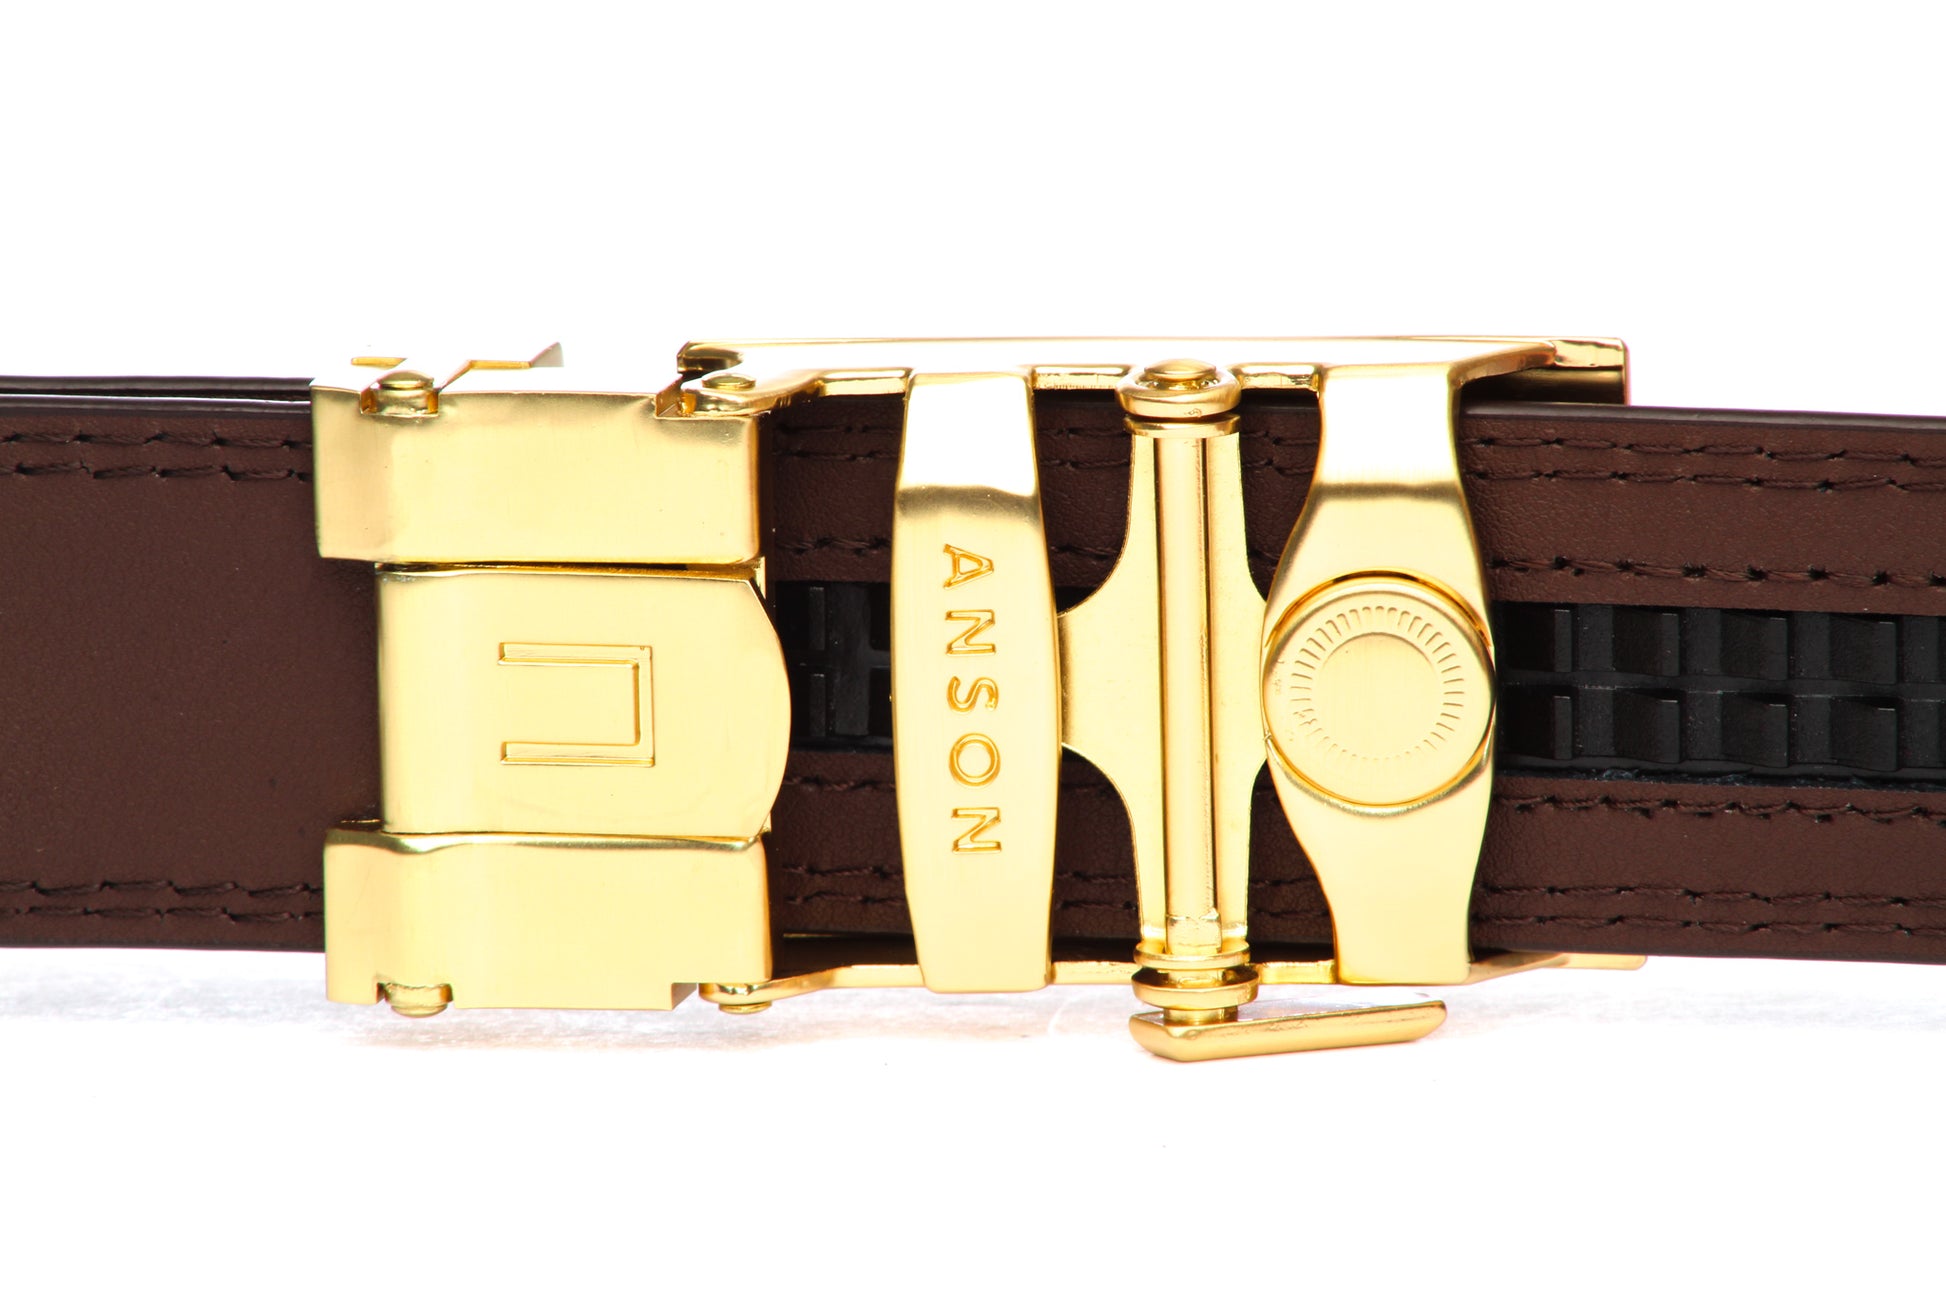 Men's classic ratchet belt buckle in matte gold with a 1.25-inch width, back view.